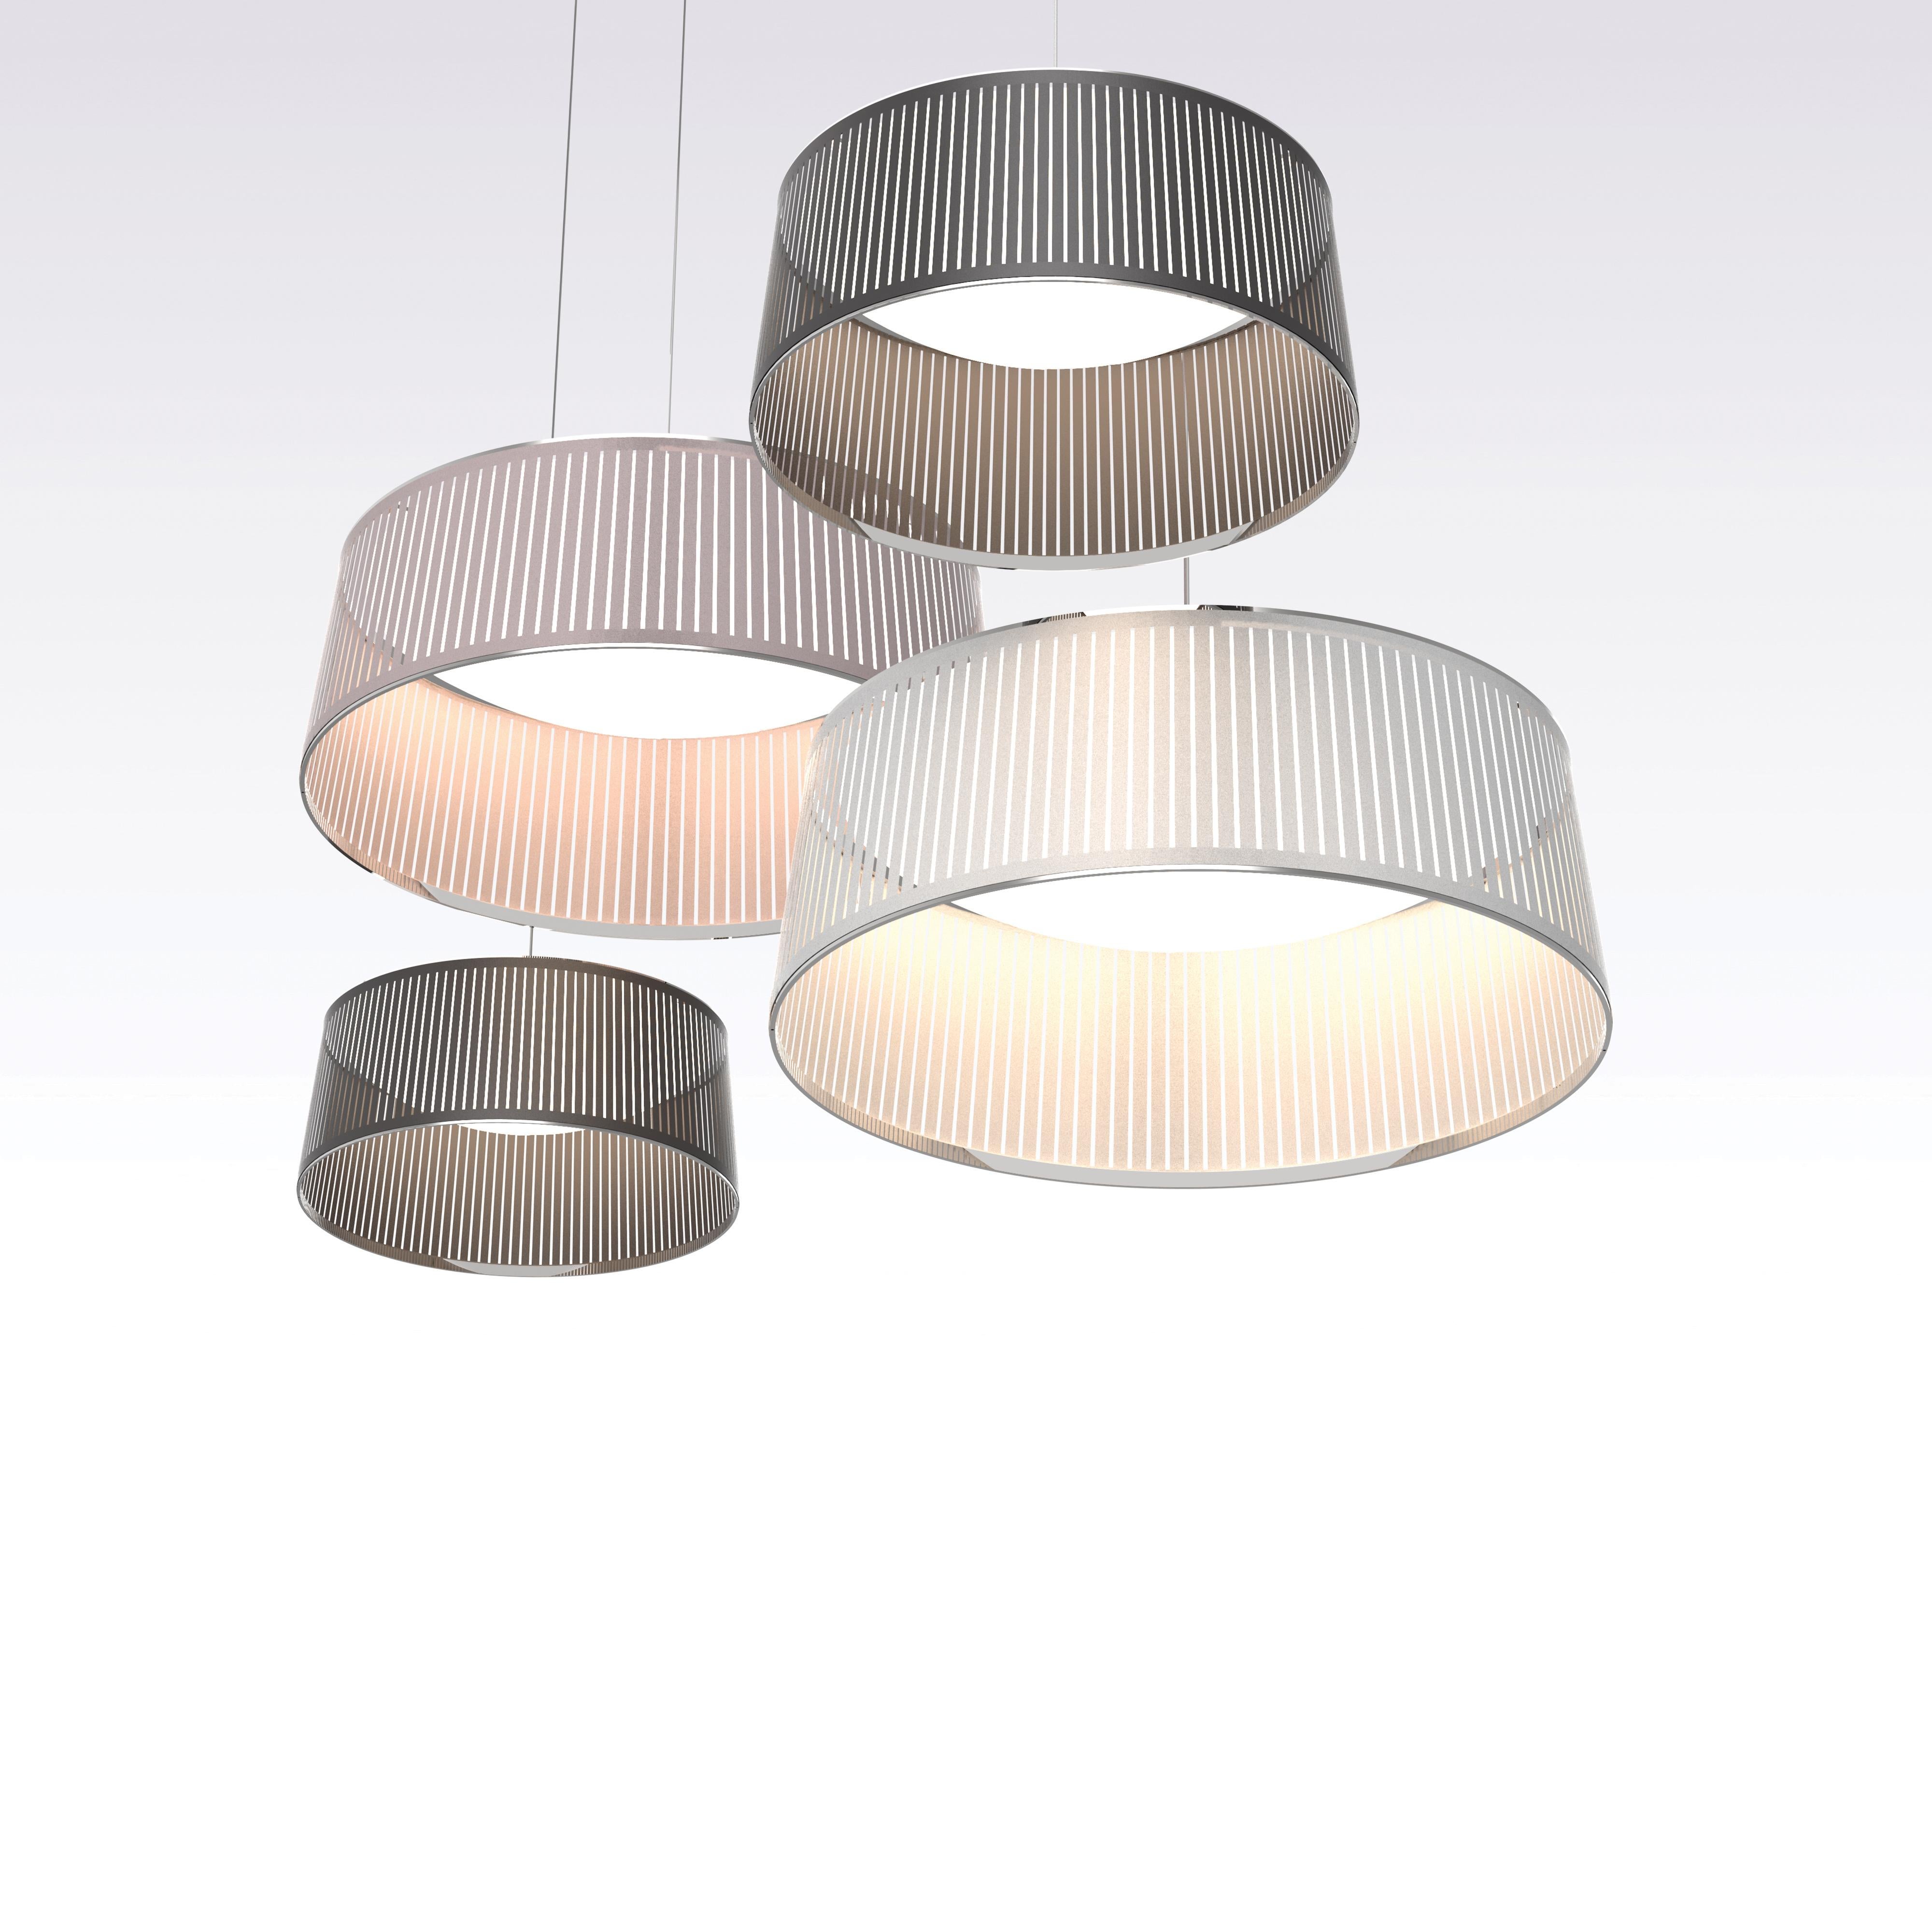 American Solis Drum 24 Pendant Light in Silver by Pablo Designs For Sale